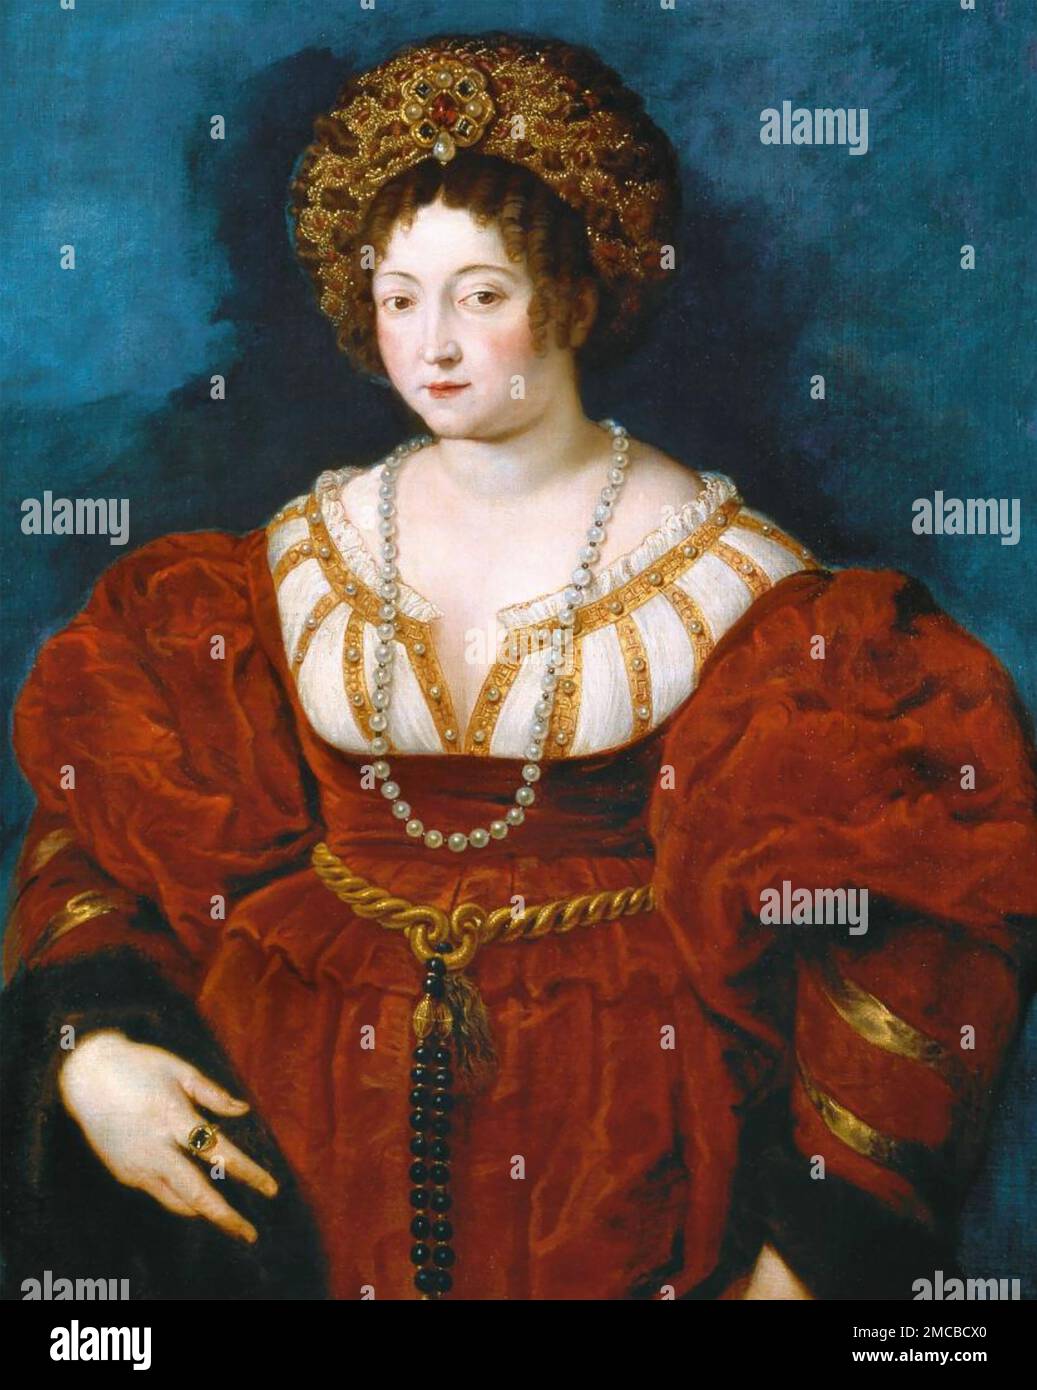 ISABELLa d'ESTE (1474-1539)  Marchioness of Mantua and a leading figure in the Italian Renaissance Stock Photo